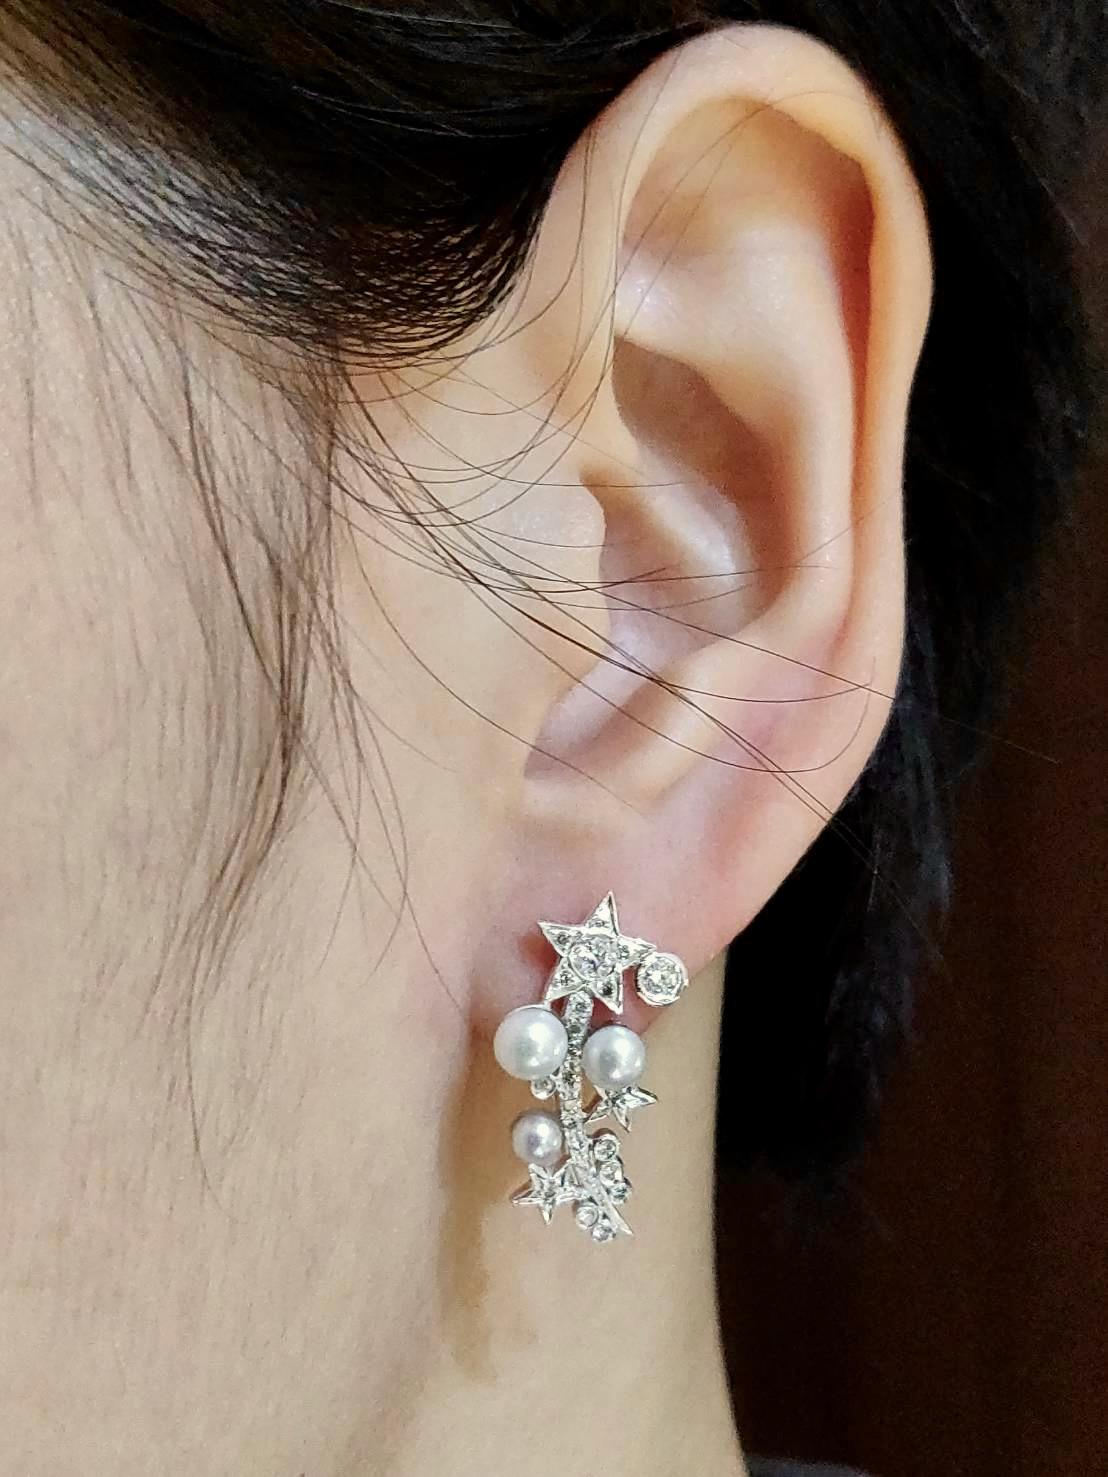 BOON Signature Starry Pearly Ear Cuff

Earring by Unit for Pierced Left Ear in 18K White Gold, adorned with White Diamonds and Pearls.

Can be worn traditionally like little dangle earrings or in middle of the lobe along antitragus away from the